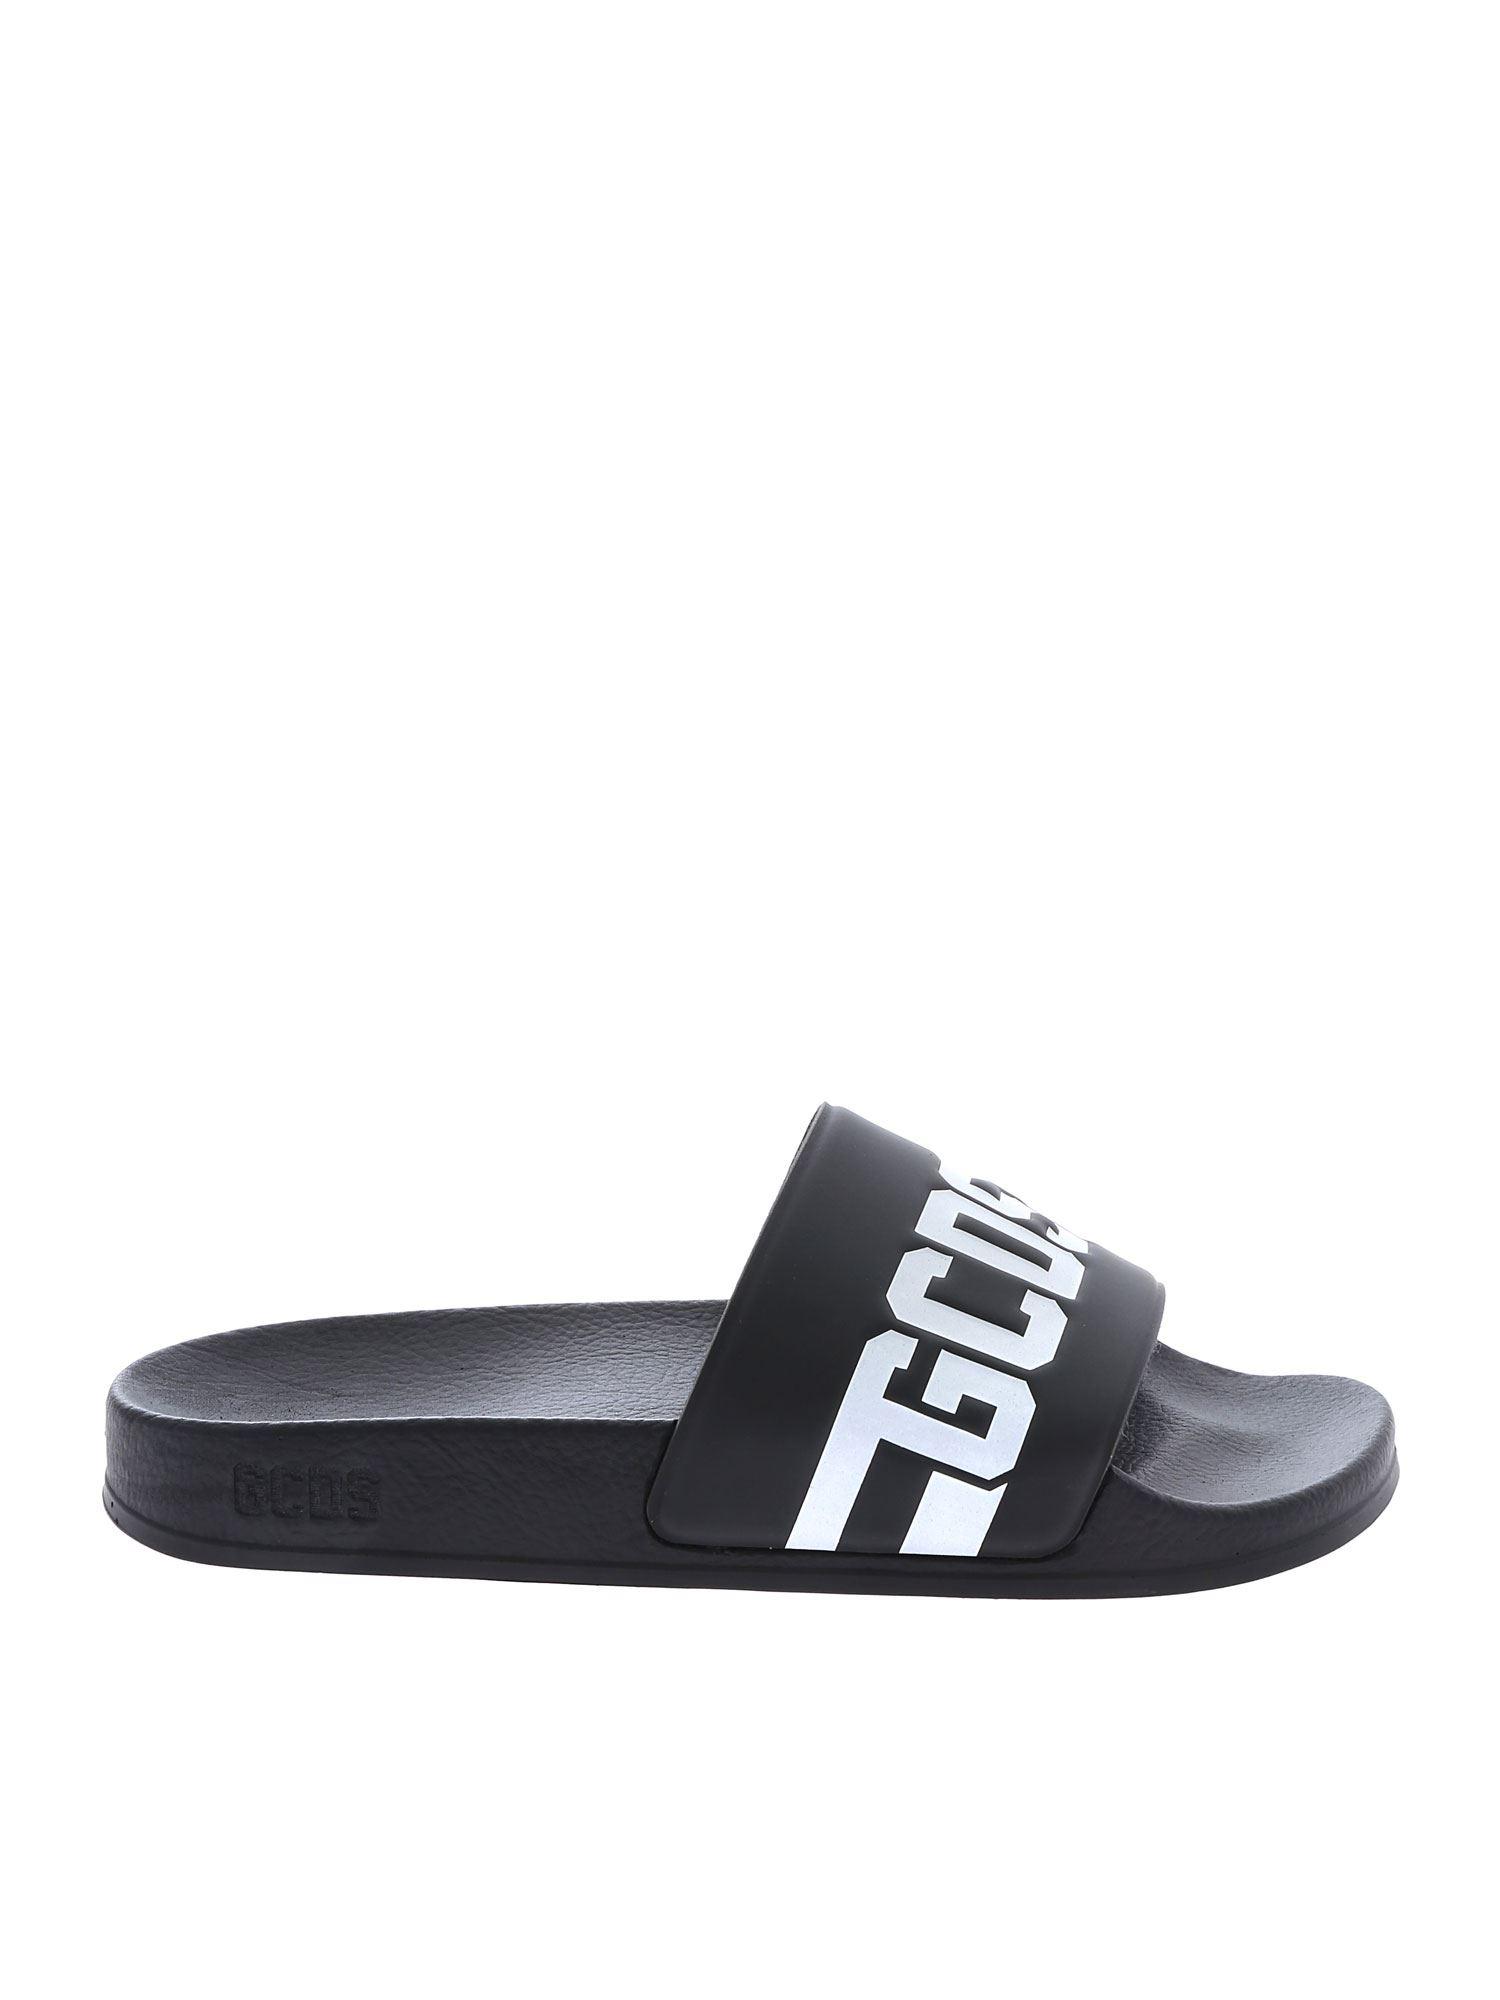 Gcds Rubber Black Sandals With Logo - Lyst